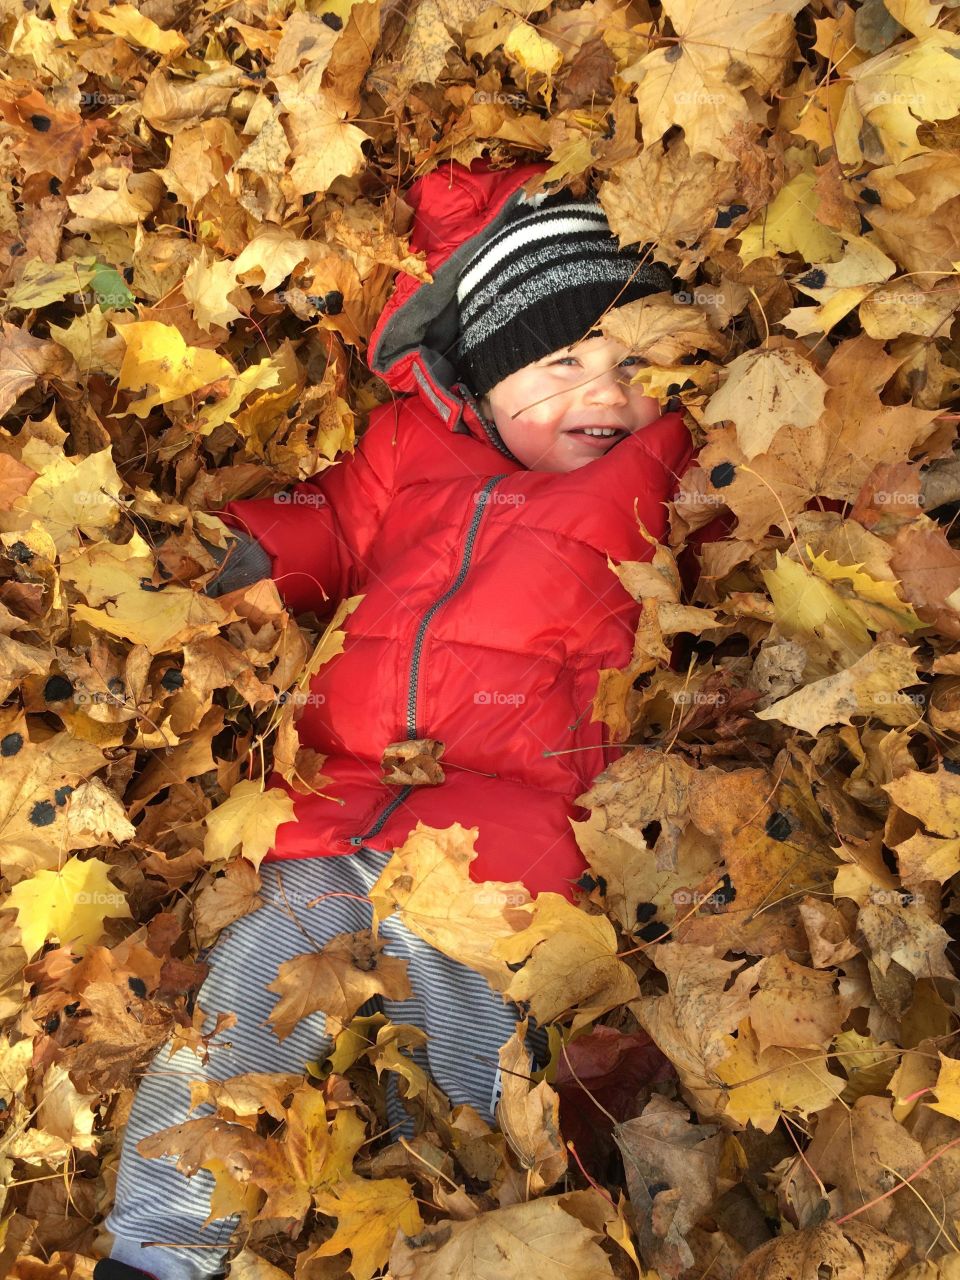 Playing in the leaves. 